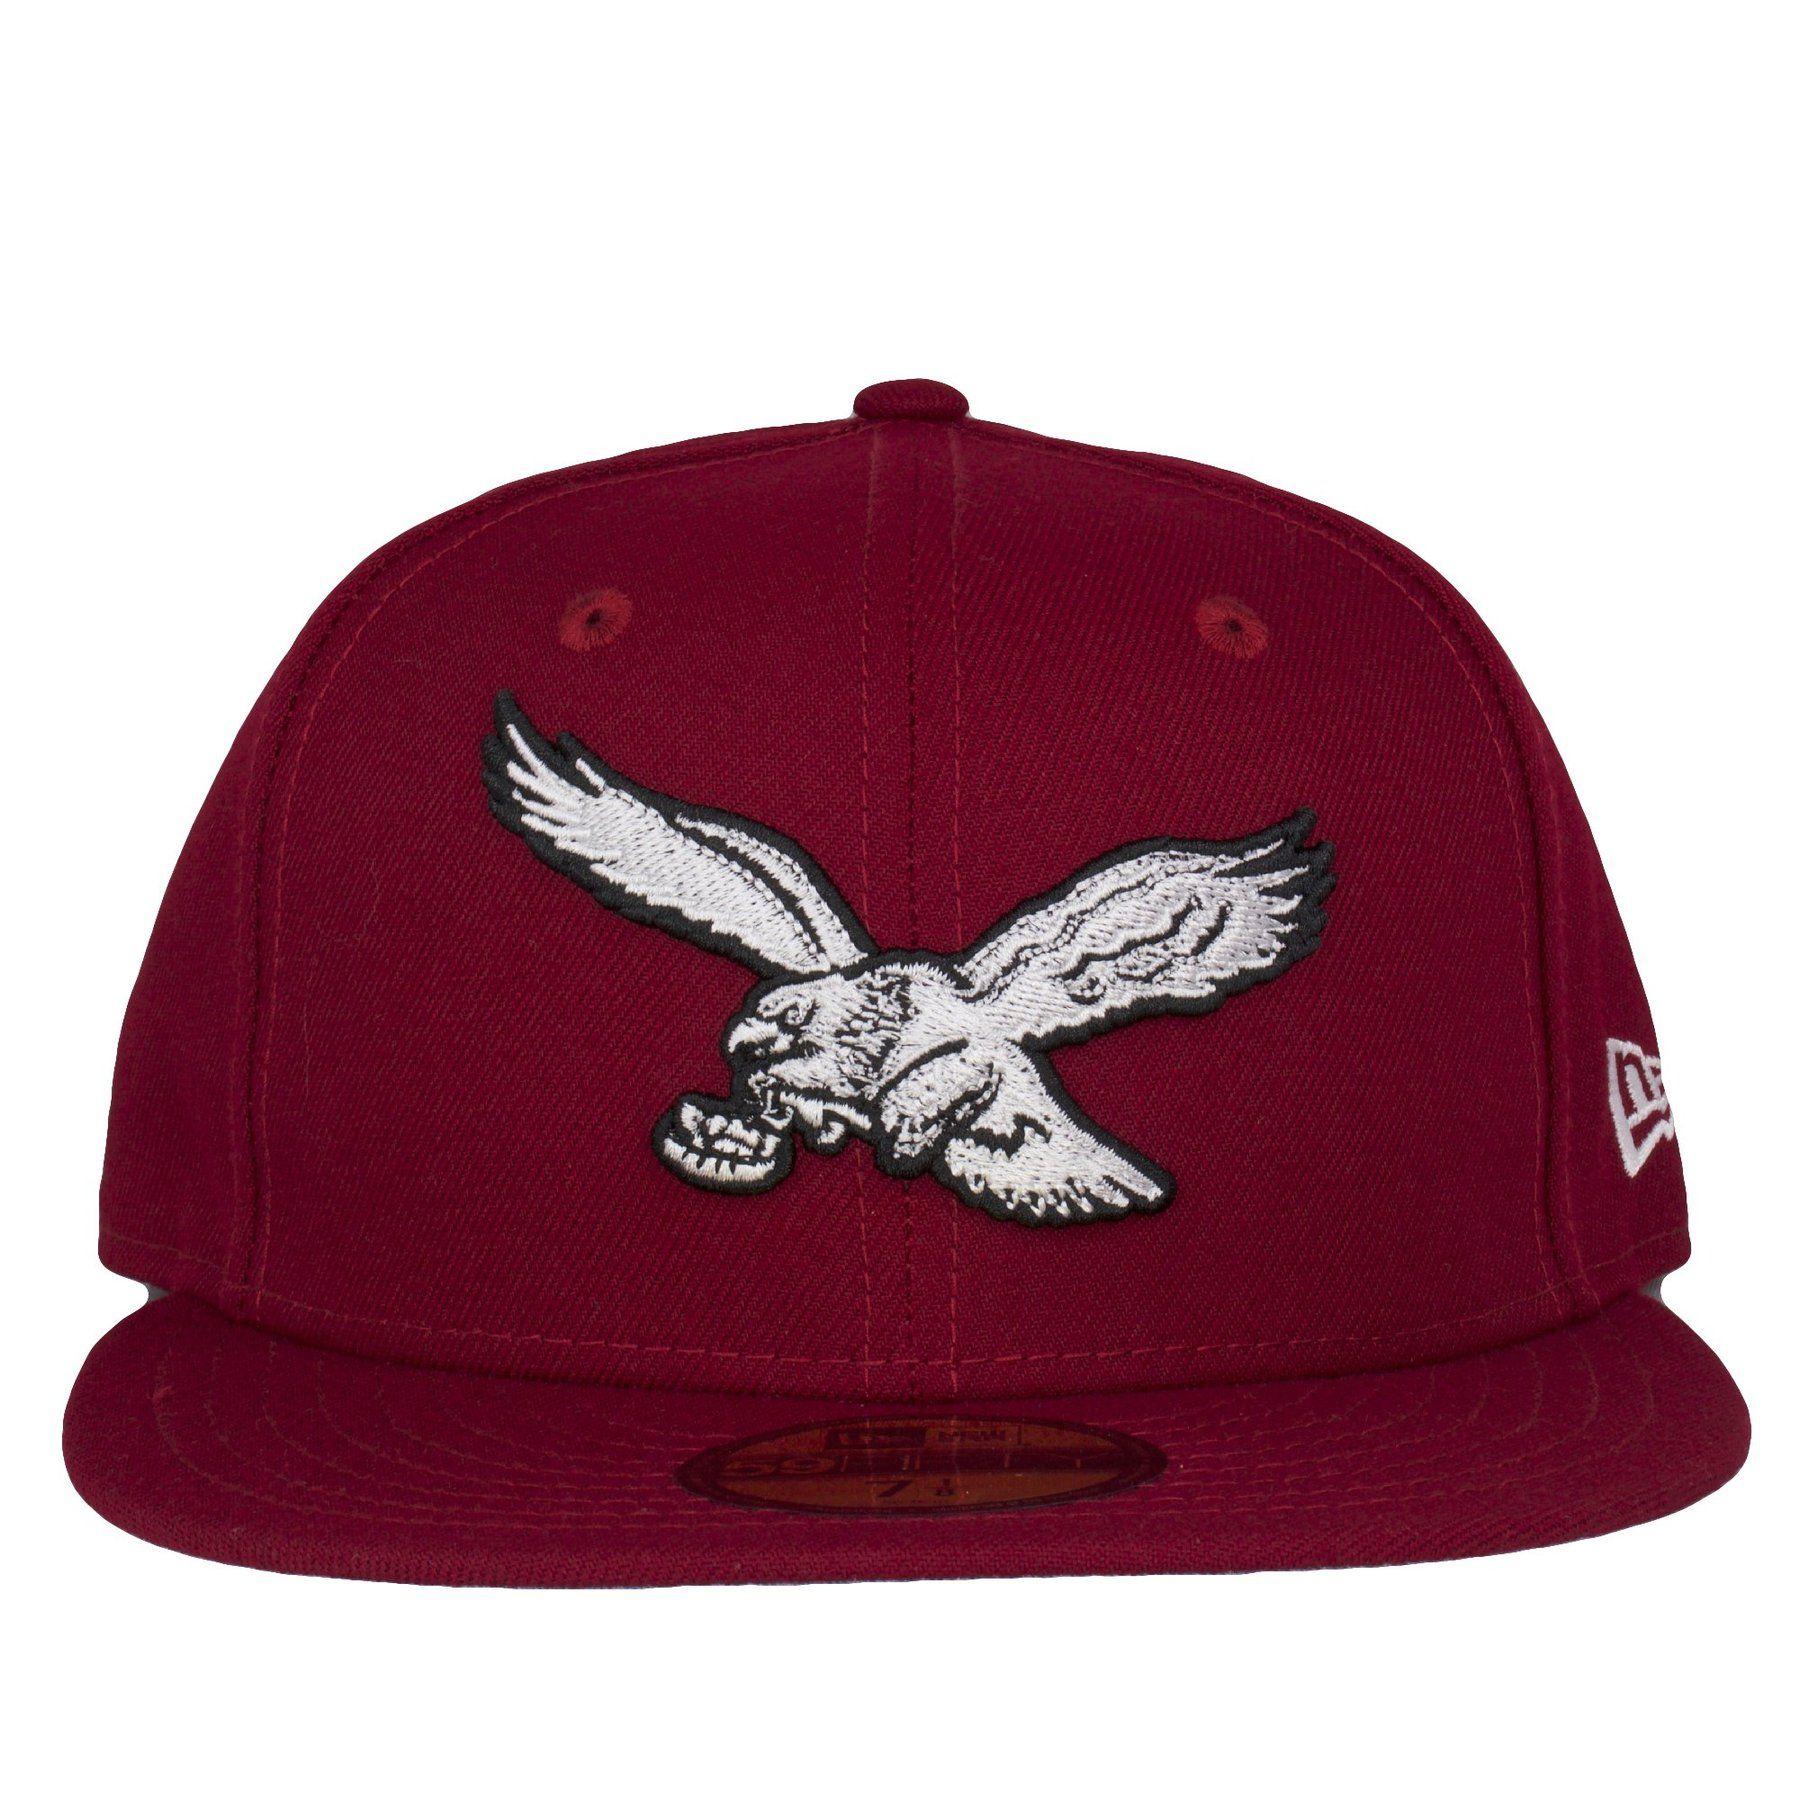 Black and Red Eagles Logo - Philadelphia Eagles Throwback Logo Cooperstown Phillies Maroon